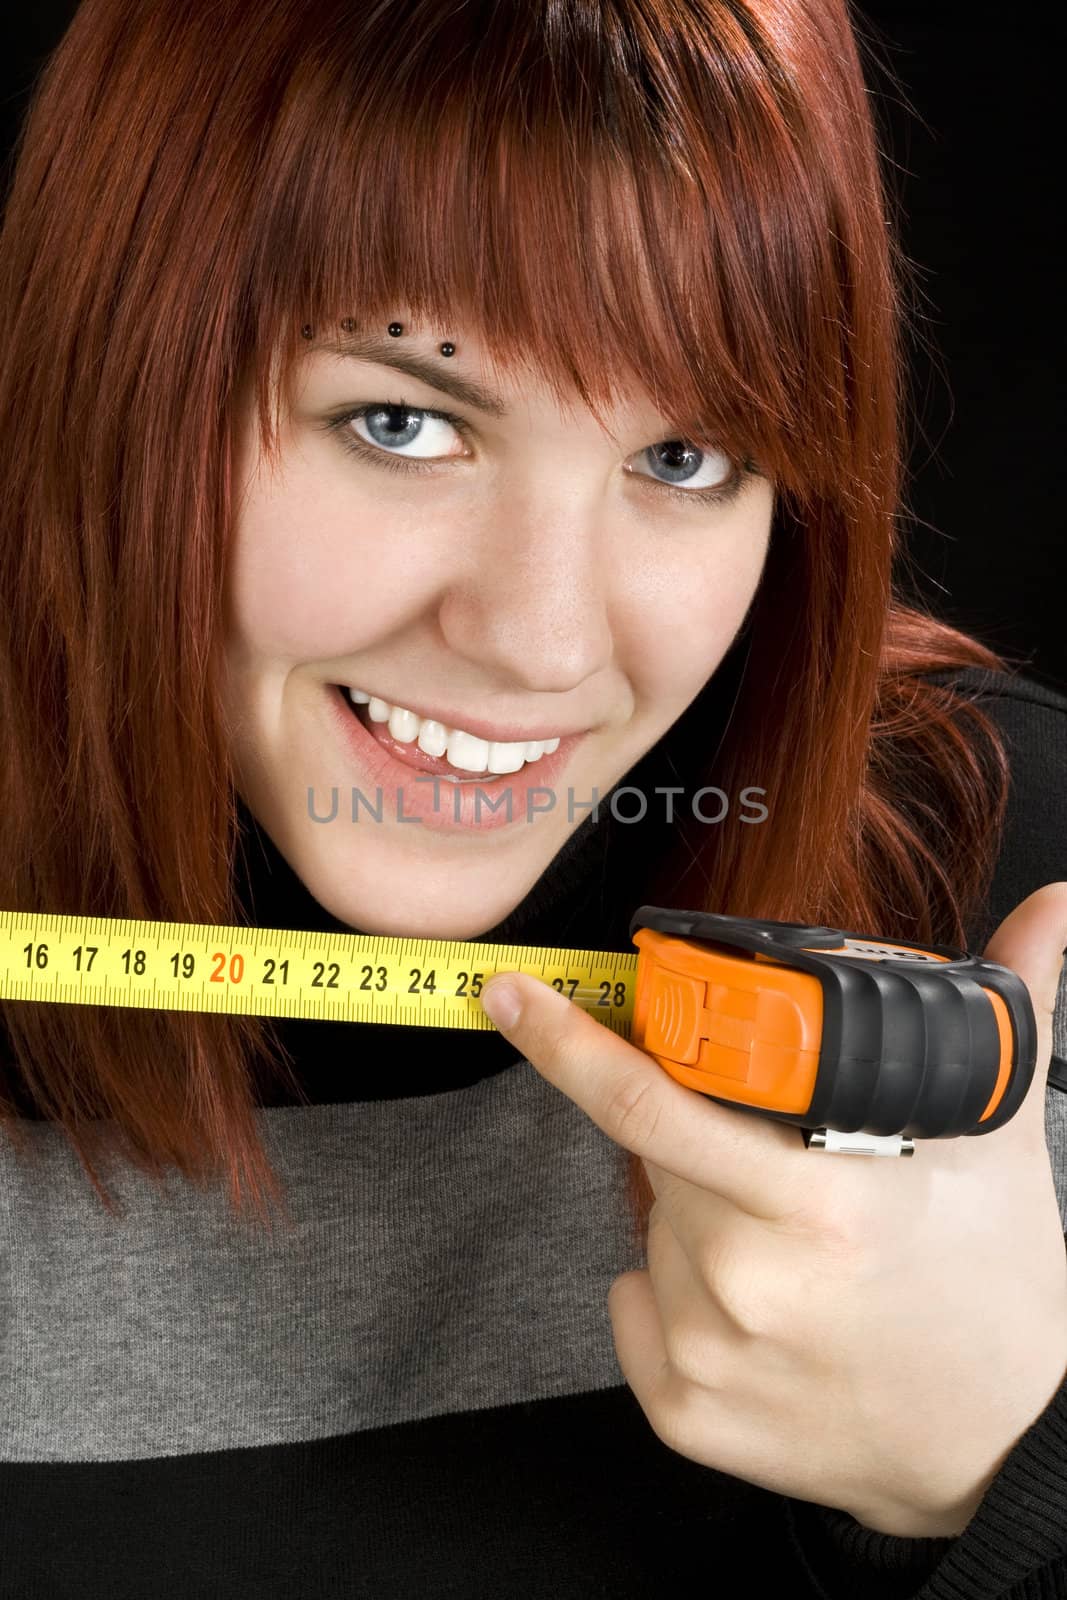 Beautiful redhead girl pointing at 25cm length and smiling. Concept allusion at male organ (penis) length.

Studio shot.